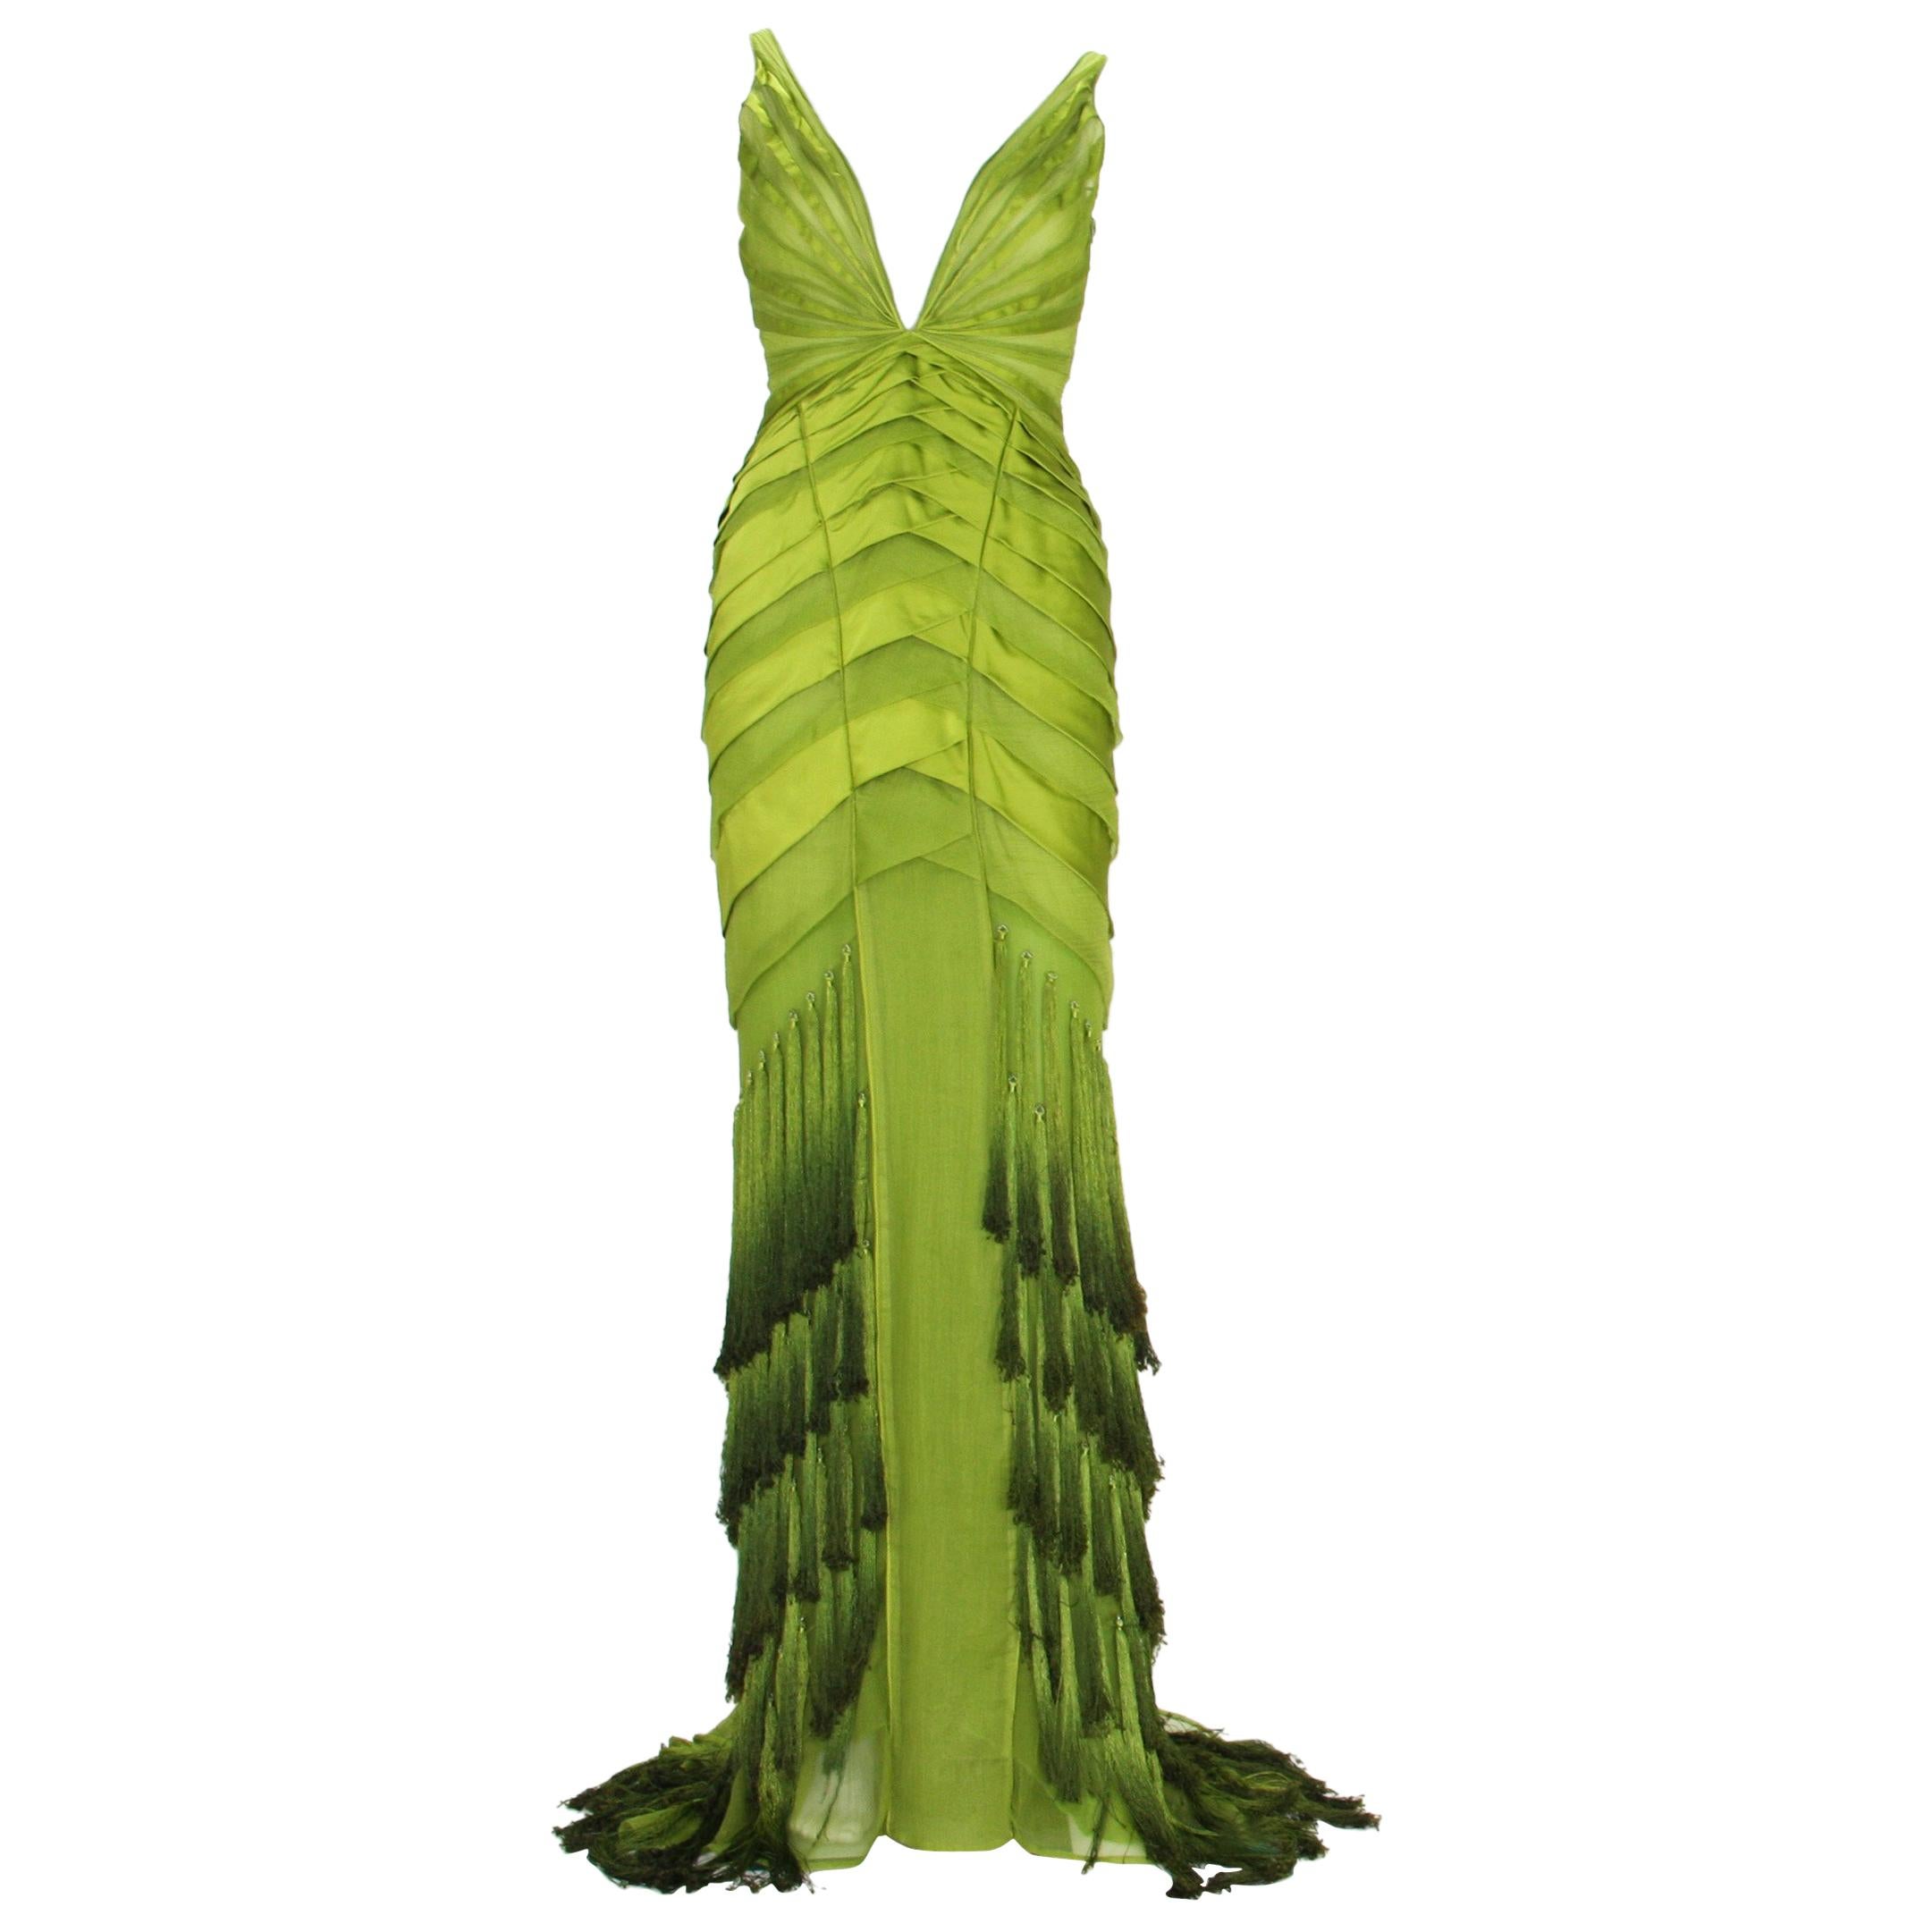 Tom Ford for Gucci 2004 F/W Collection Silk Green Tassel Dress Gown 40 - 4